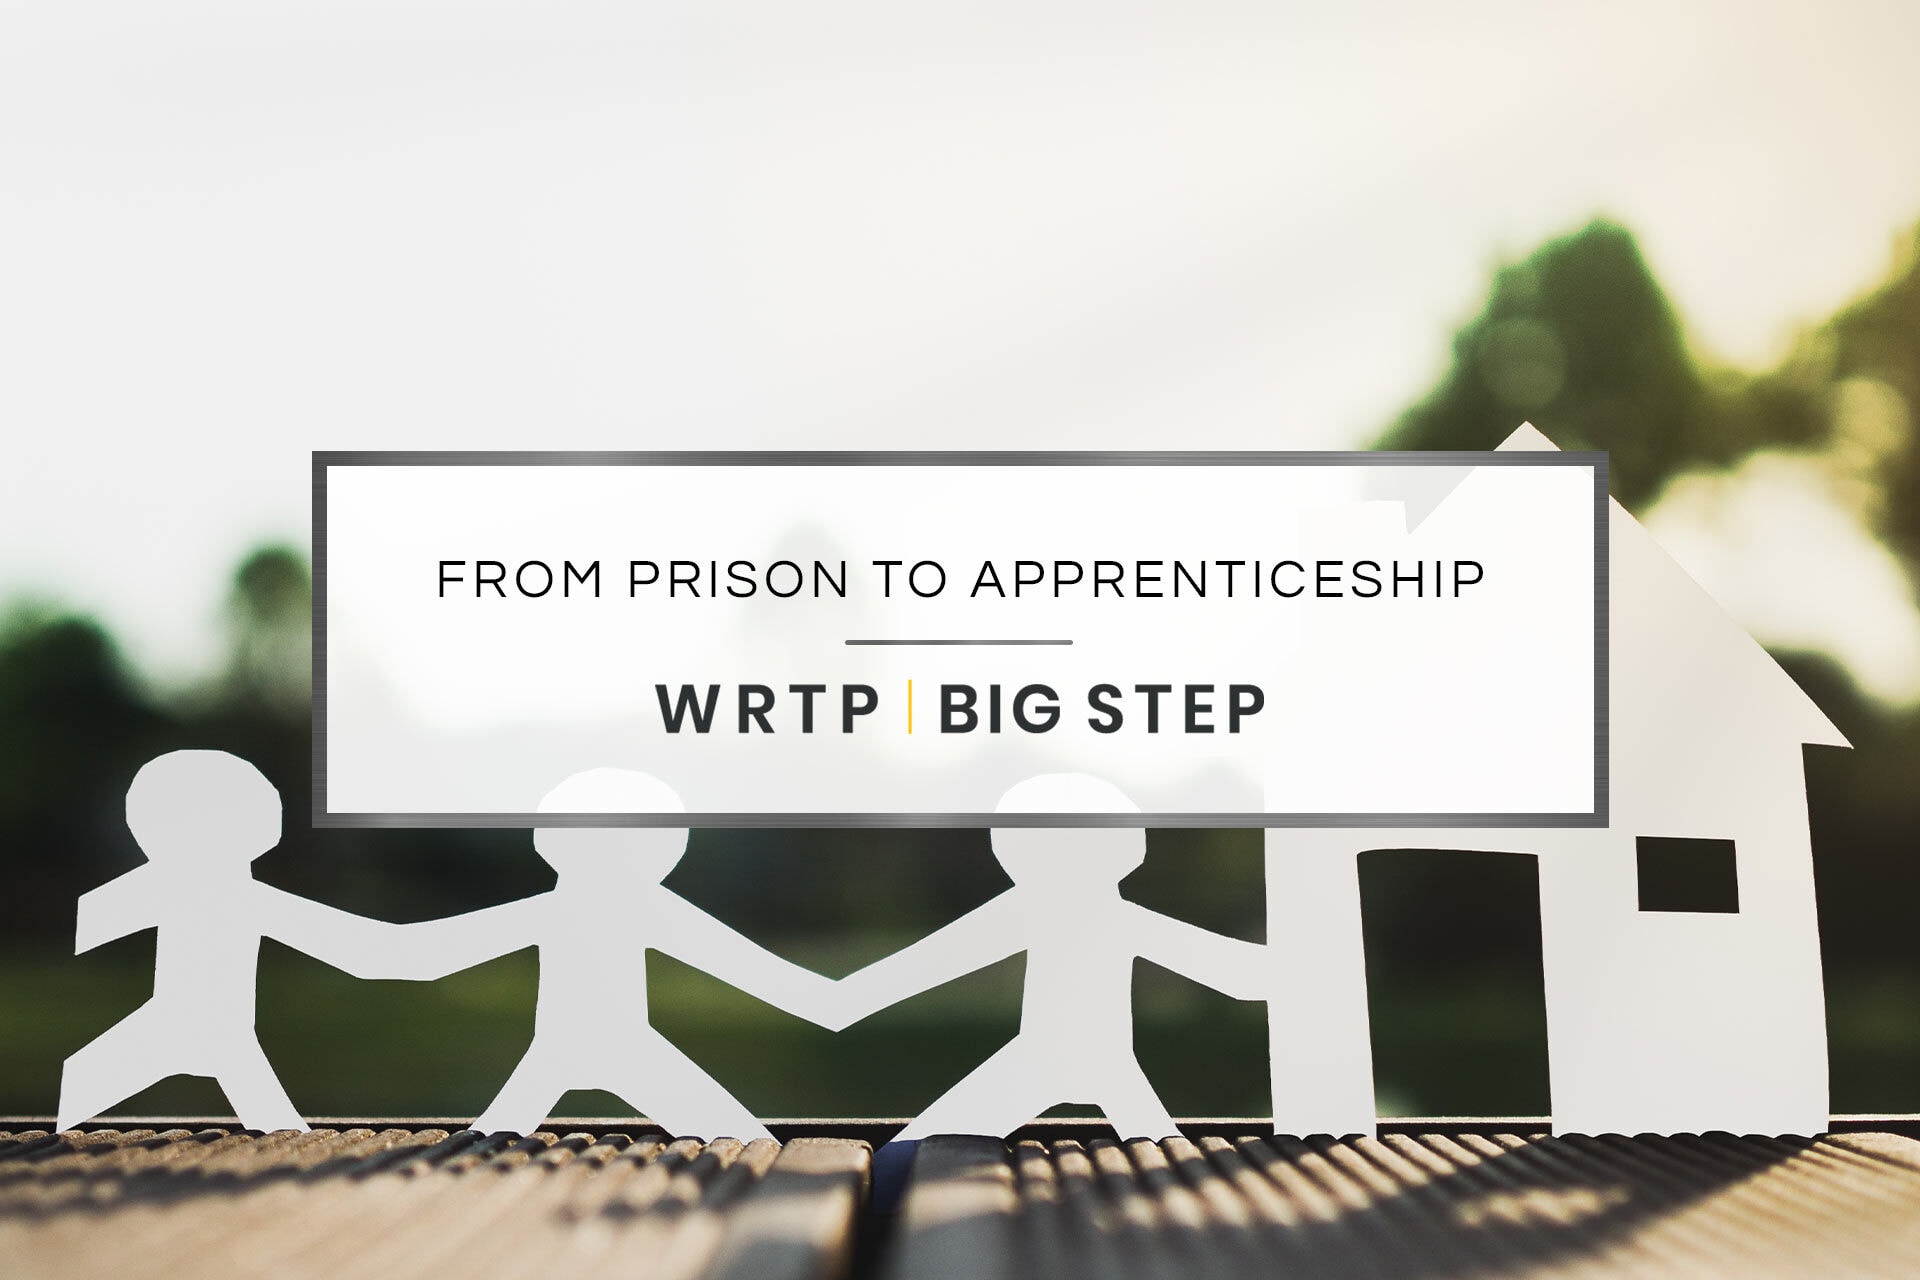 From Prison to Apprenticeship: One man's journey to change his life and Wisconsin